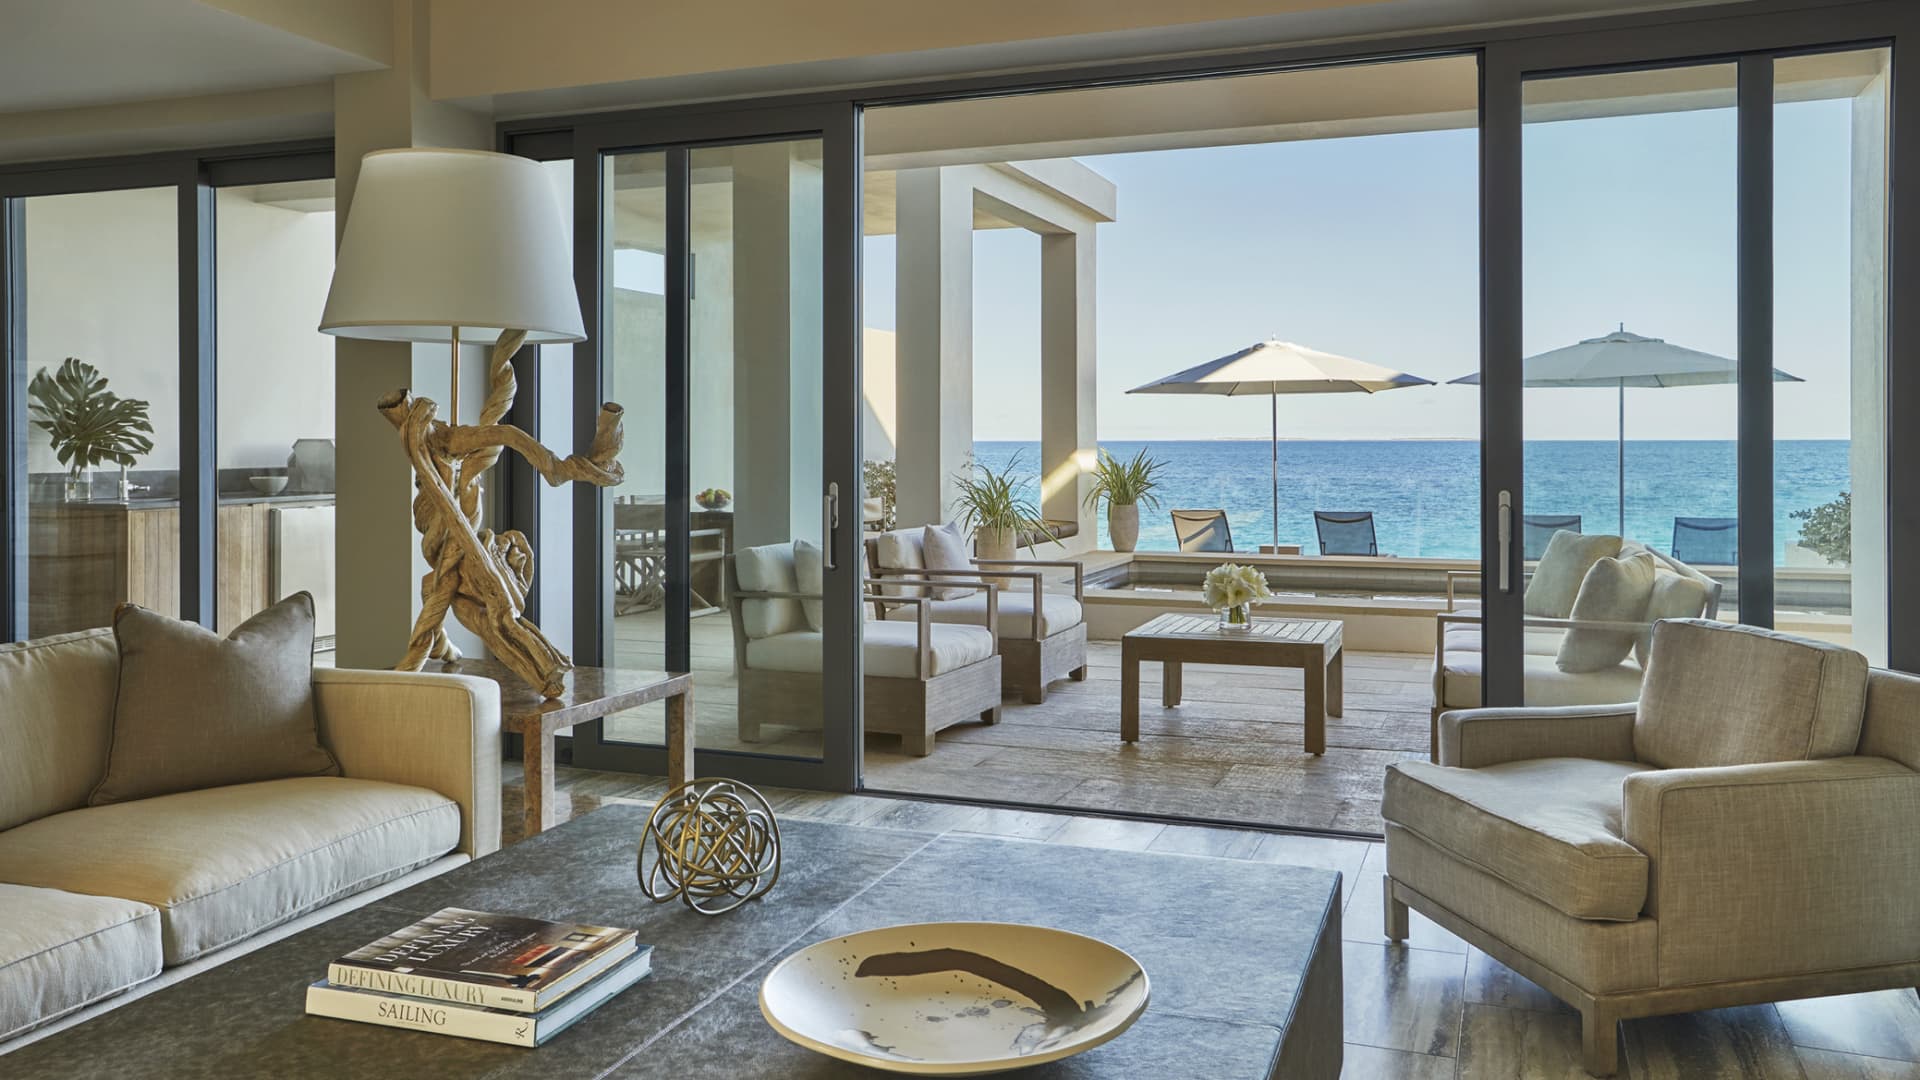 Perks are available for guests who book for 30 days or more at Four Seasons Resort and Residences Anguilla.